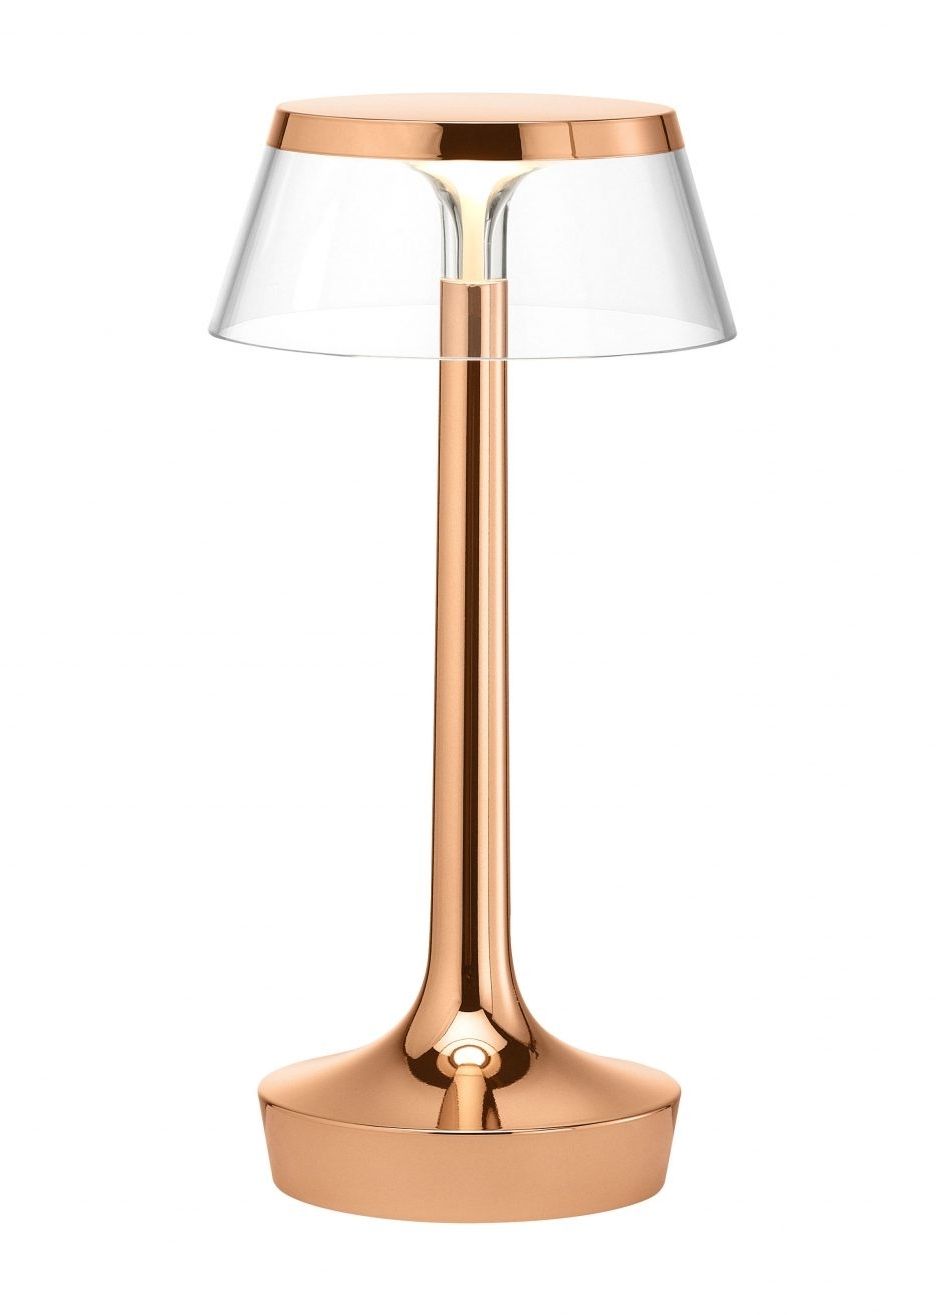 Fashionable Lamp : Battery Operated Table Lamps Modern Style Tall Glass Target Throughout Battery Operated Living Room Table Lamps (View 14 of 20)